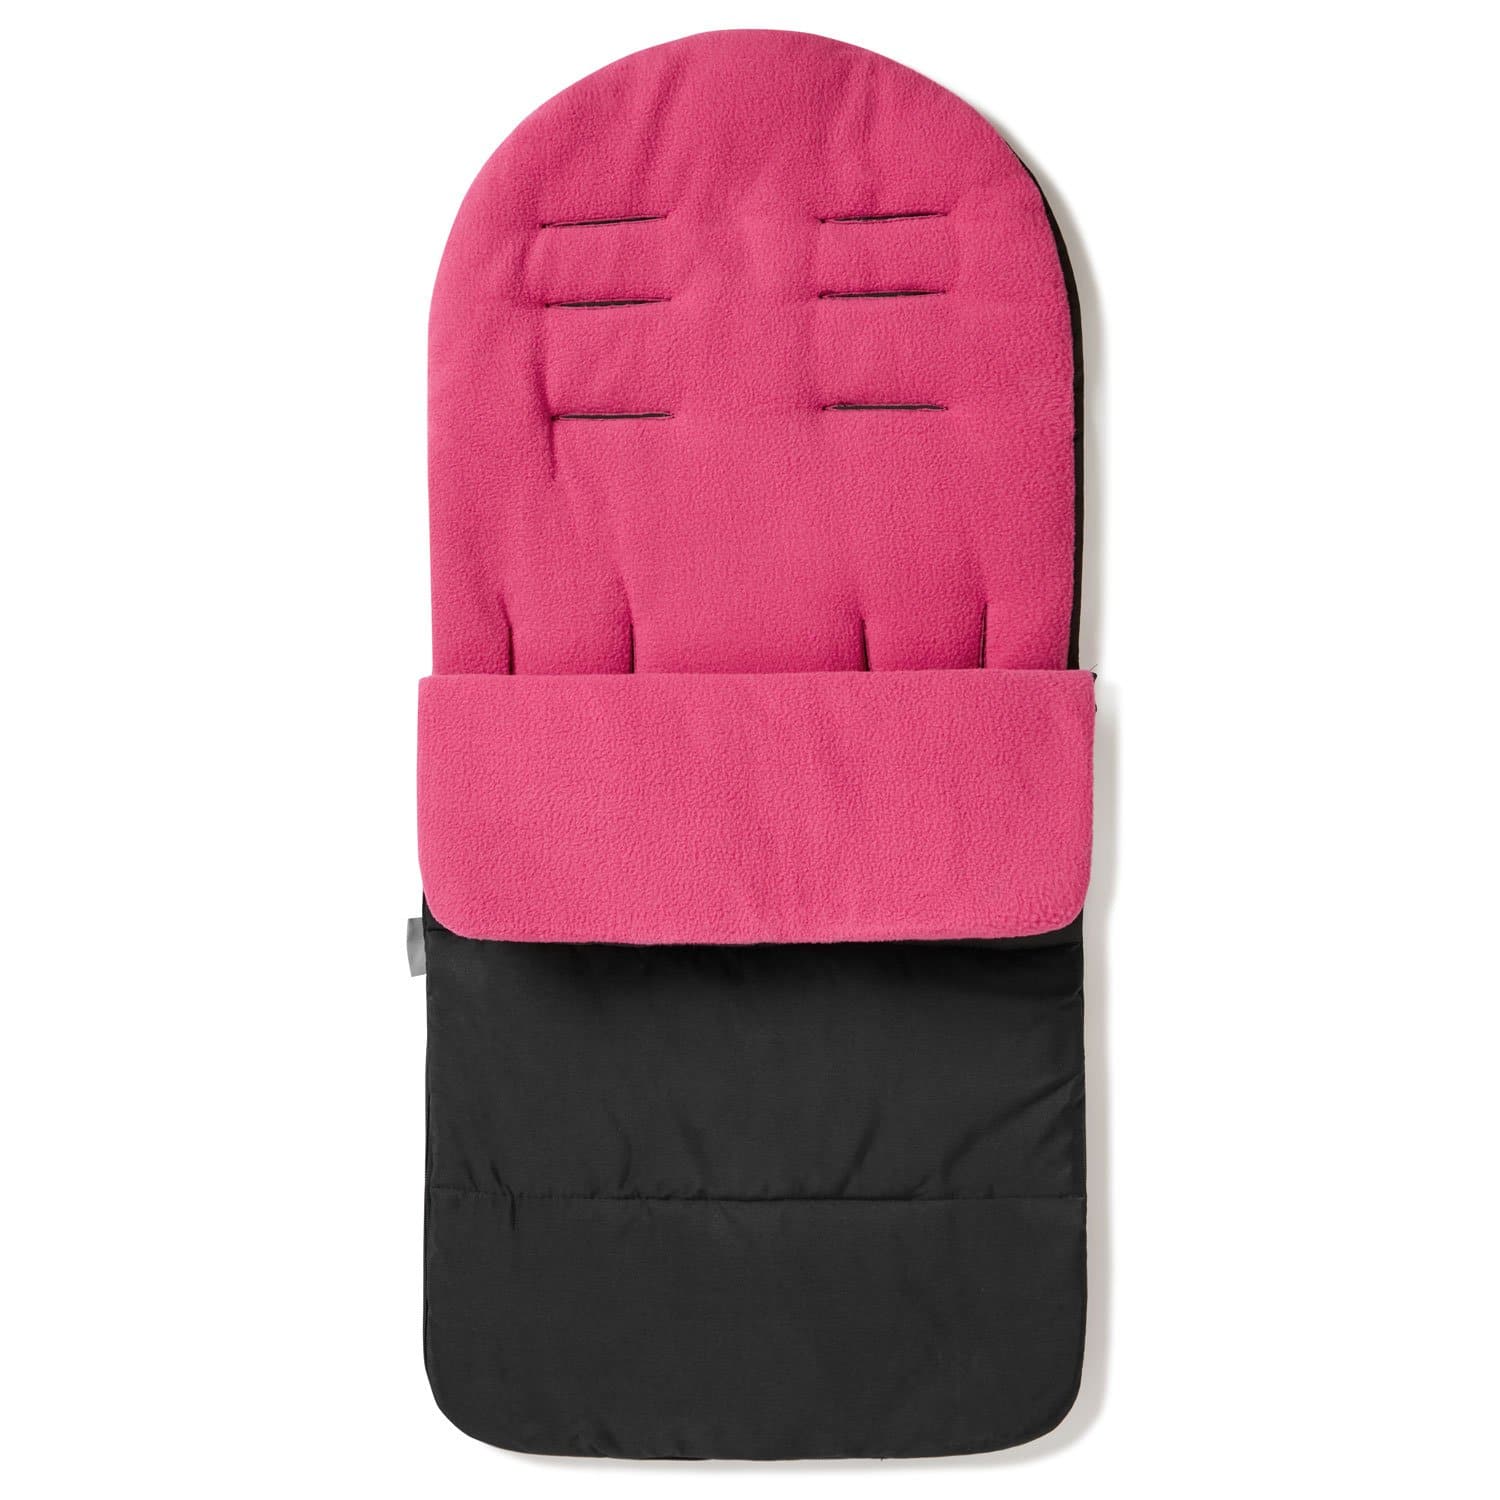 Premium Footmuff / Cosy Toes Compatible with Red Kite - For Your Little One